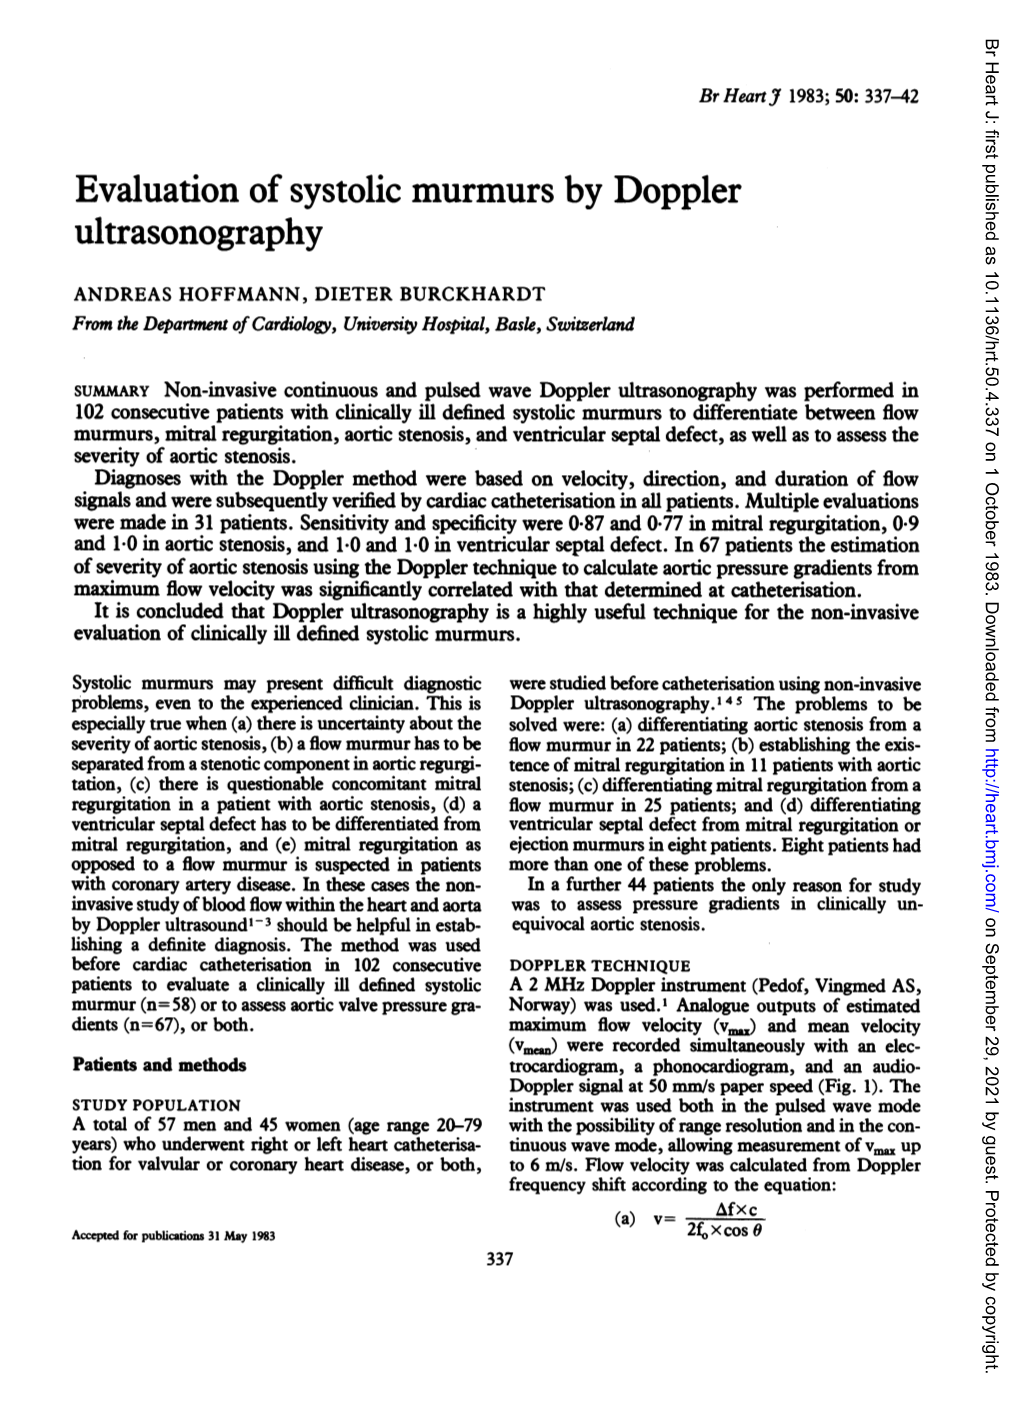 Evaluation of Systolic Murmurs by Doppler Ultrasonography